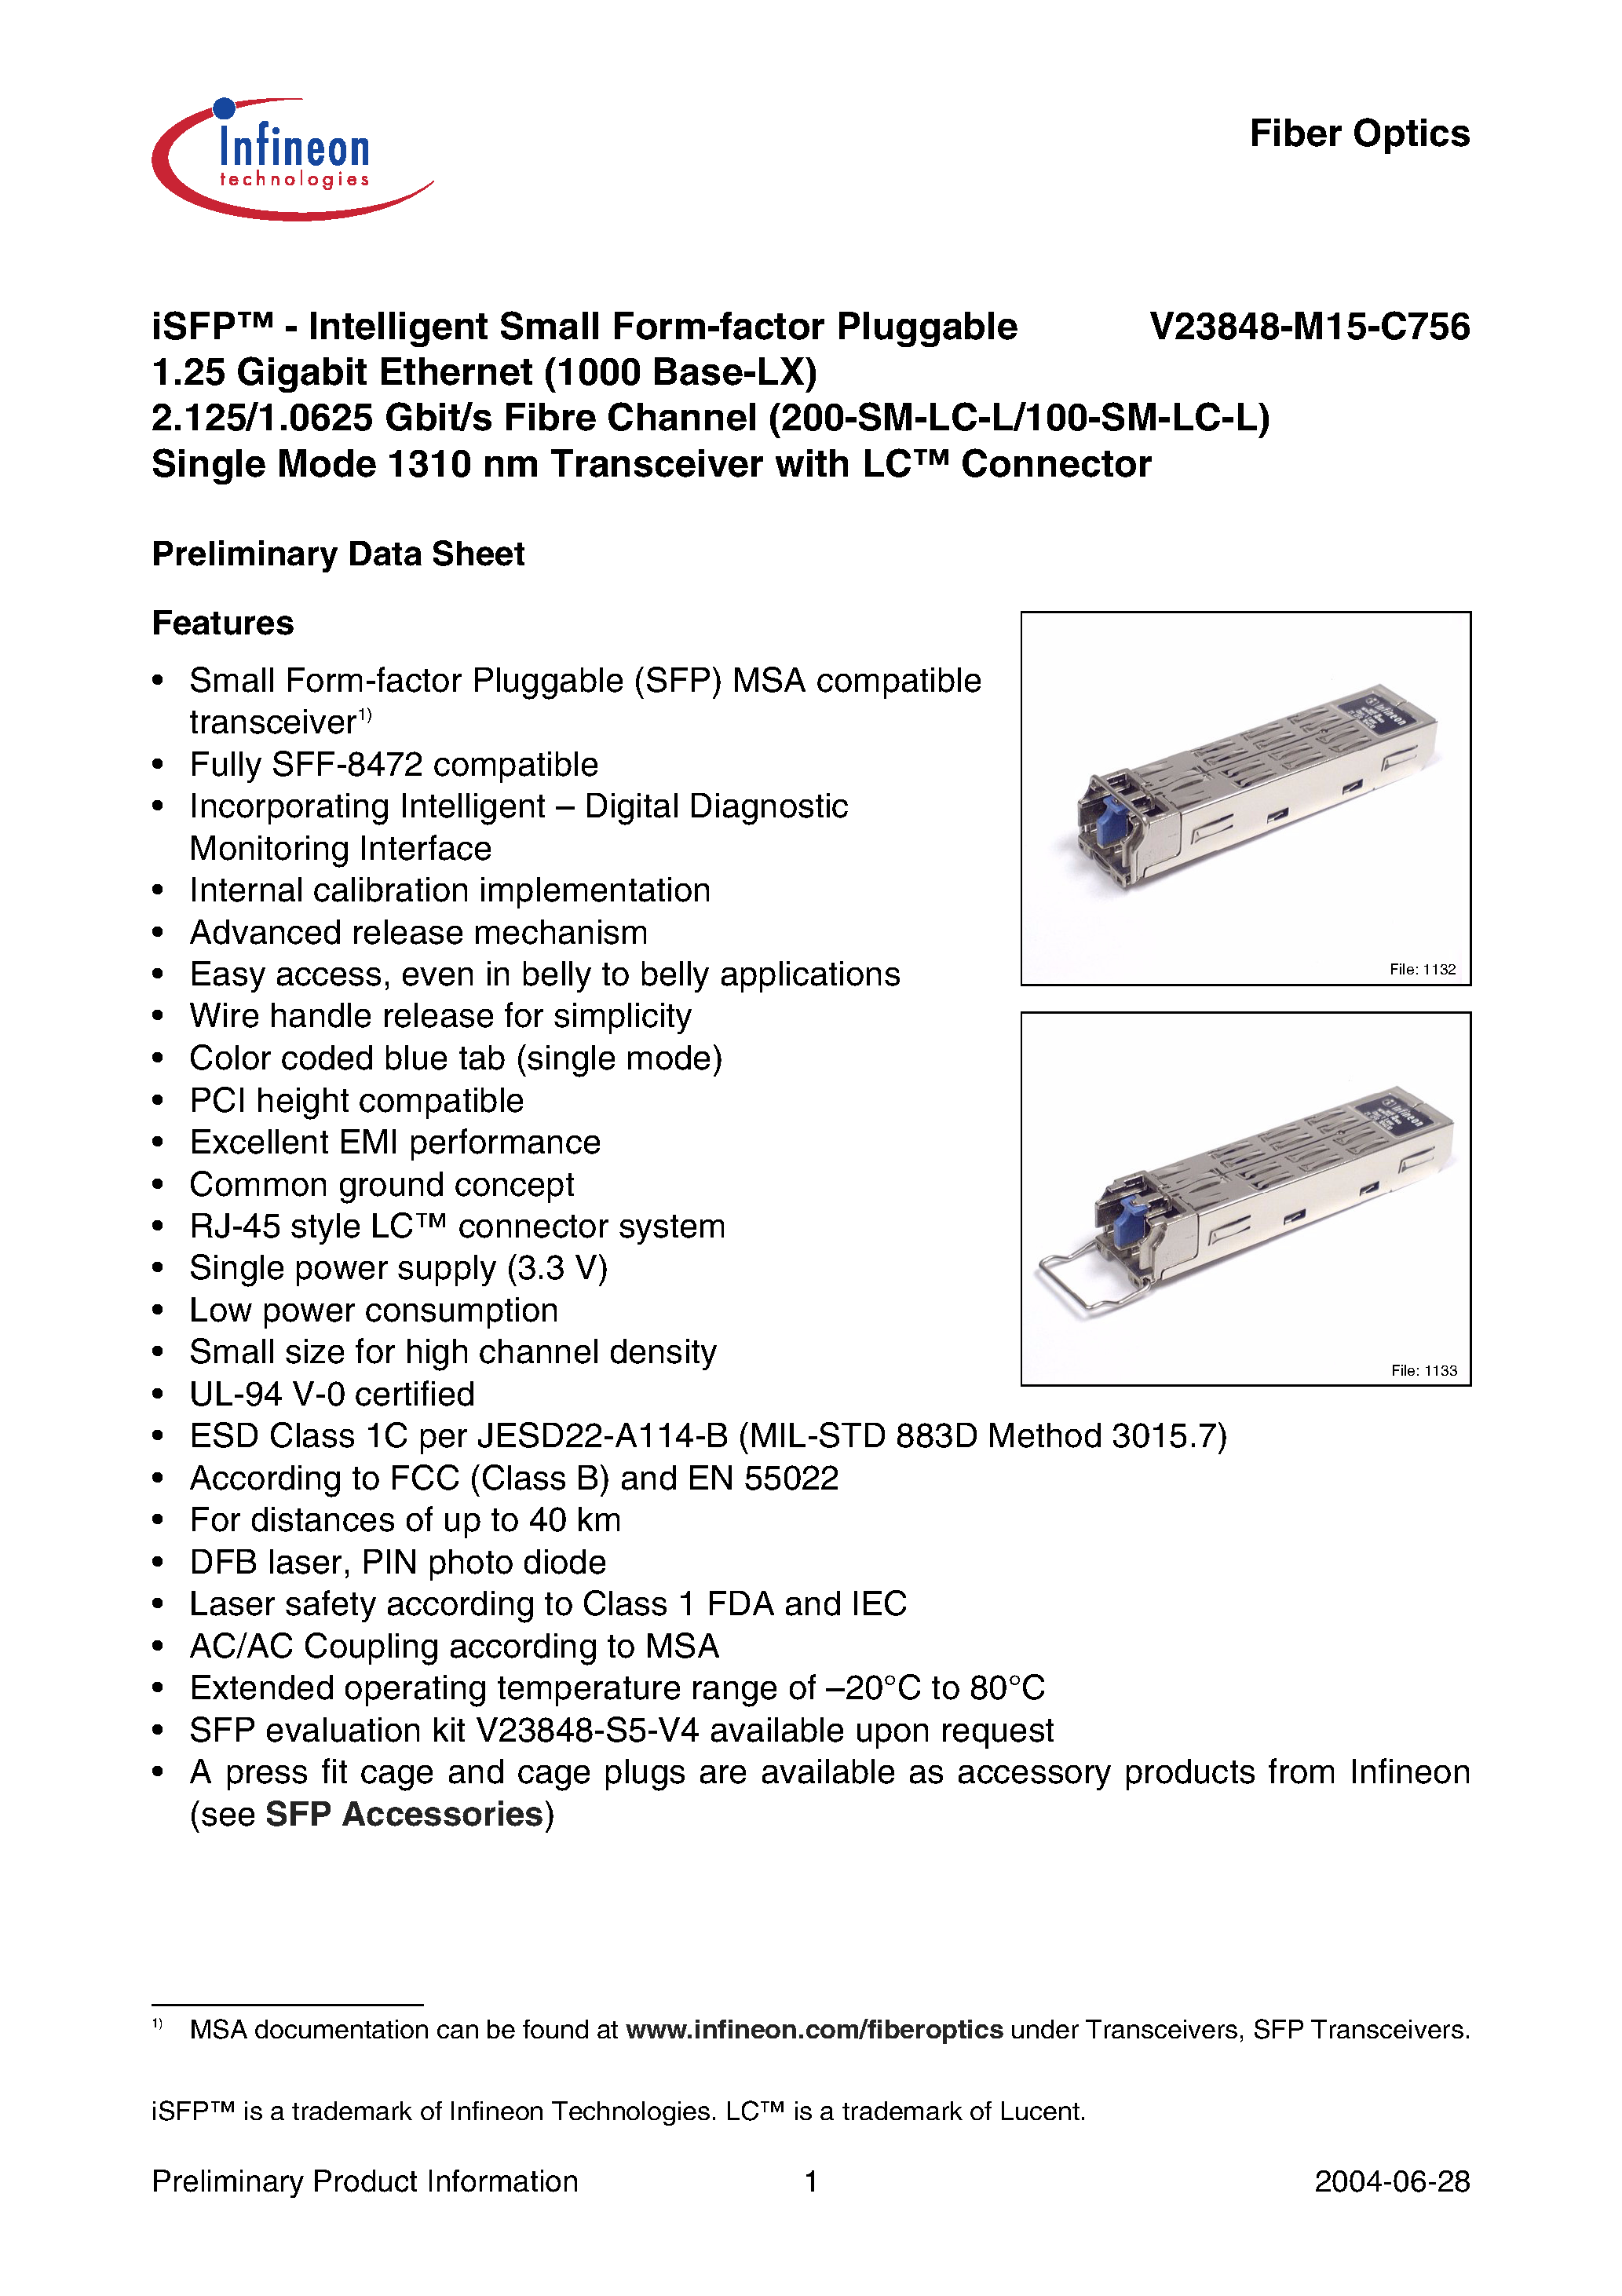 Datasheet V23848-M15-C756 - iSFP-Intelligent Small Form-factor Pluggable 1.25 Gigabit Ethernet 2.125/1.0625 Gbit/s Fibre Channel Single Mode 1310 nm Transceiver with LC Connector page 1